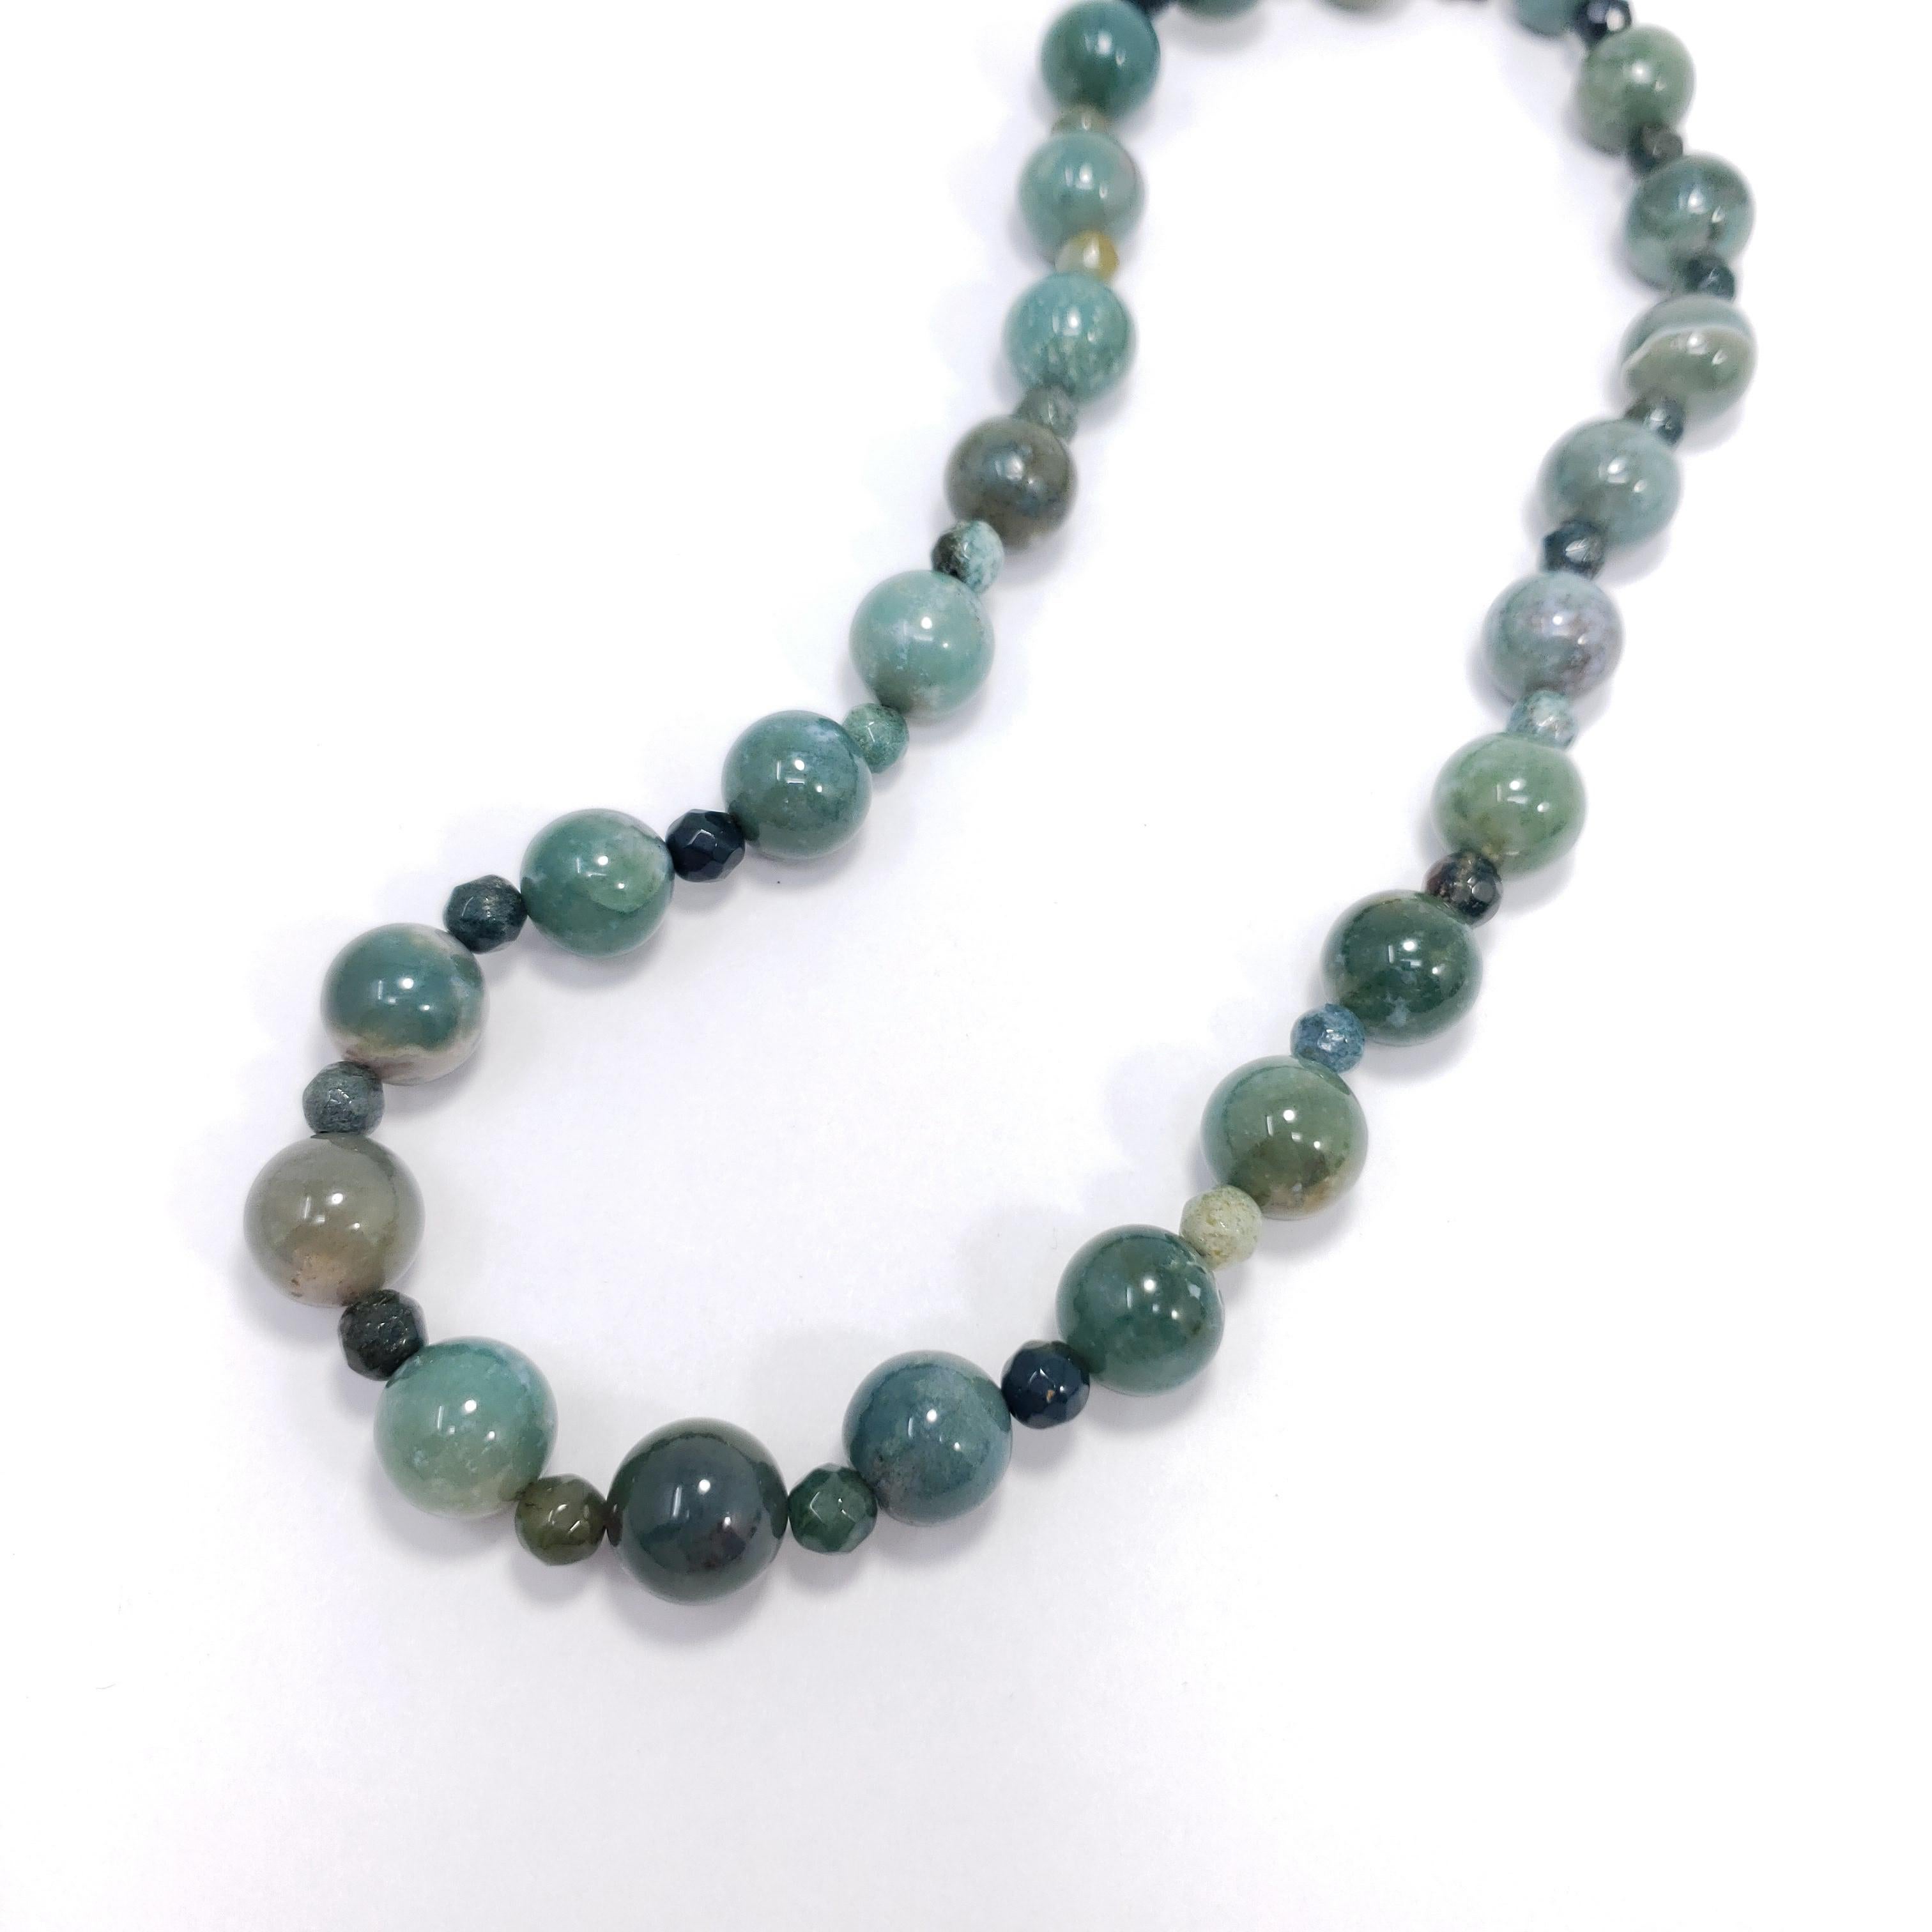 Retro Vintage Jade Bead String Necklace, Alternating Beads, Mid to late 1900s